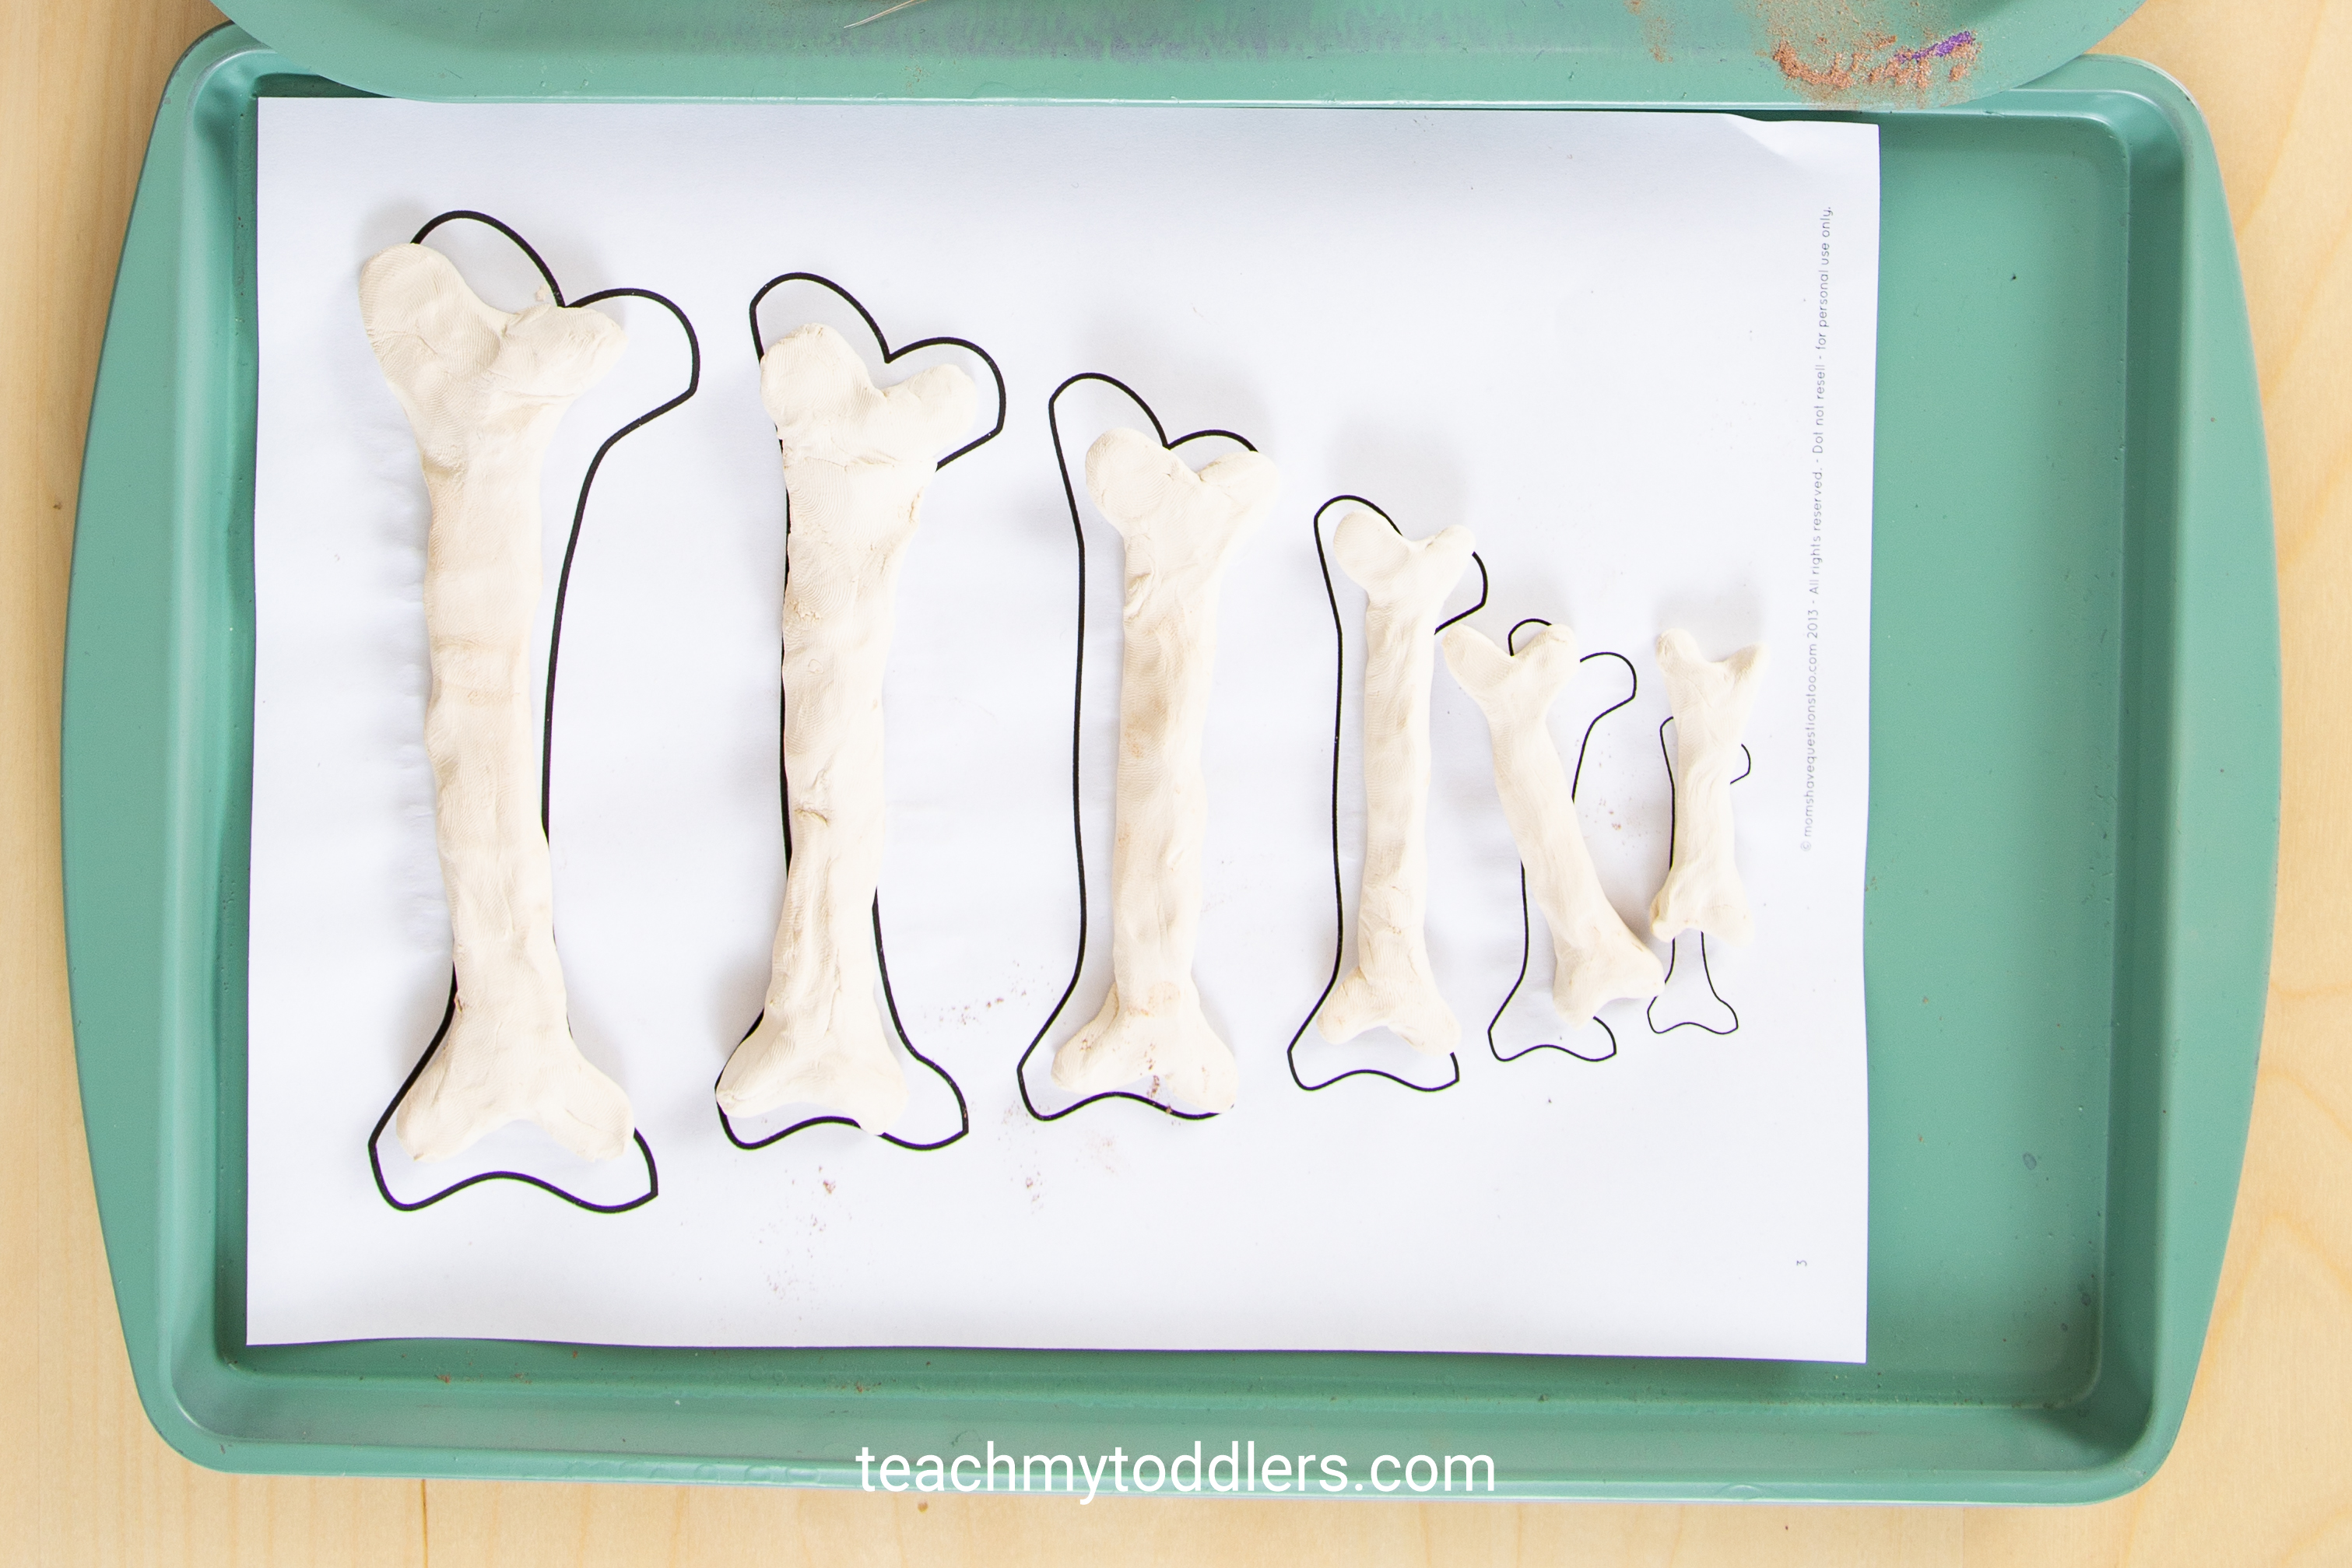 These toddler trays are fun for teaching your toddler the letter e is for extinct